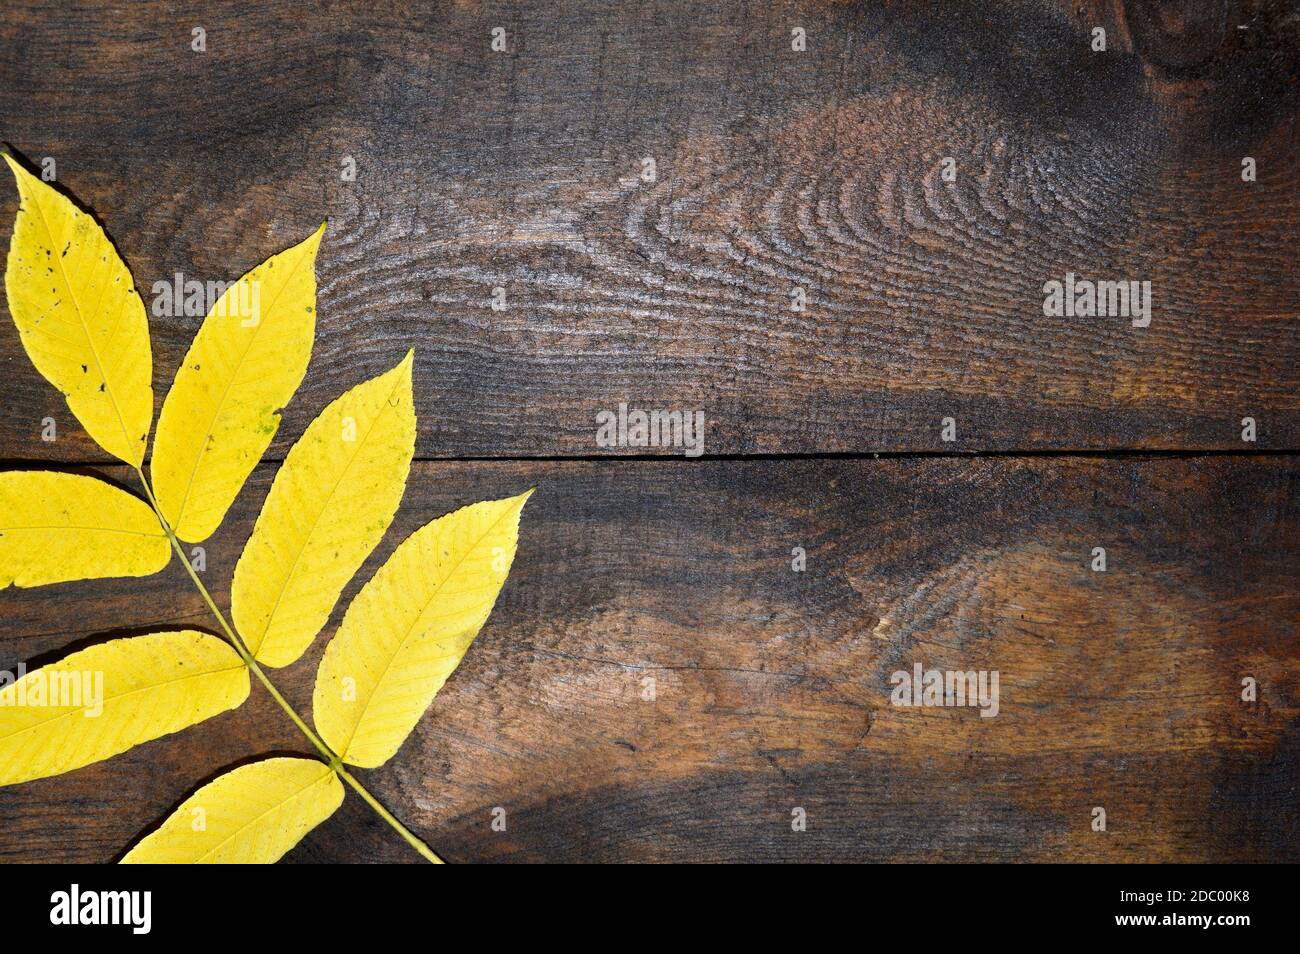 Yellow Manchurian walnut leaves (Juglans mandshurica) on dark brown wooden surface. Autumn composition with copy space. Stock Photo